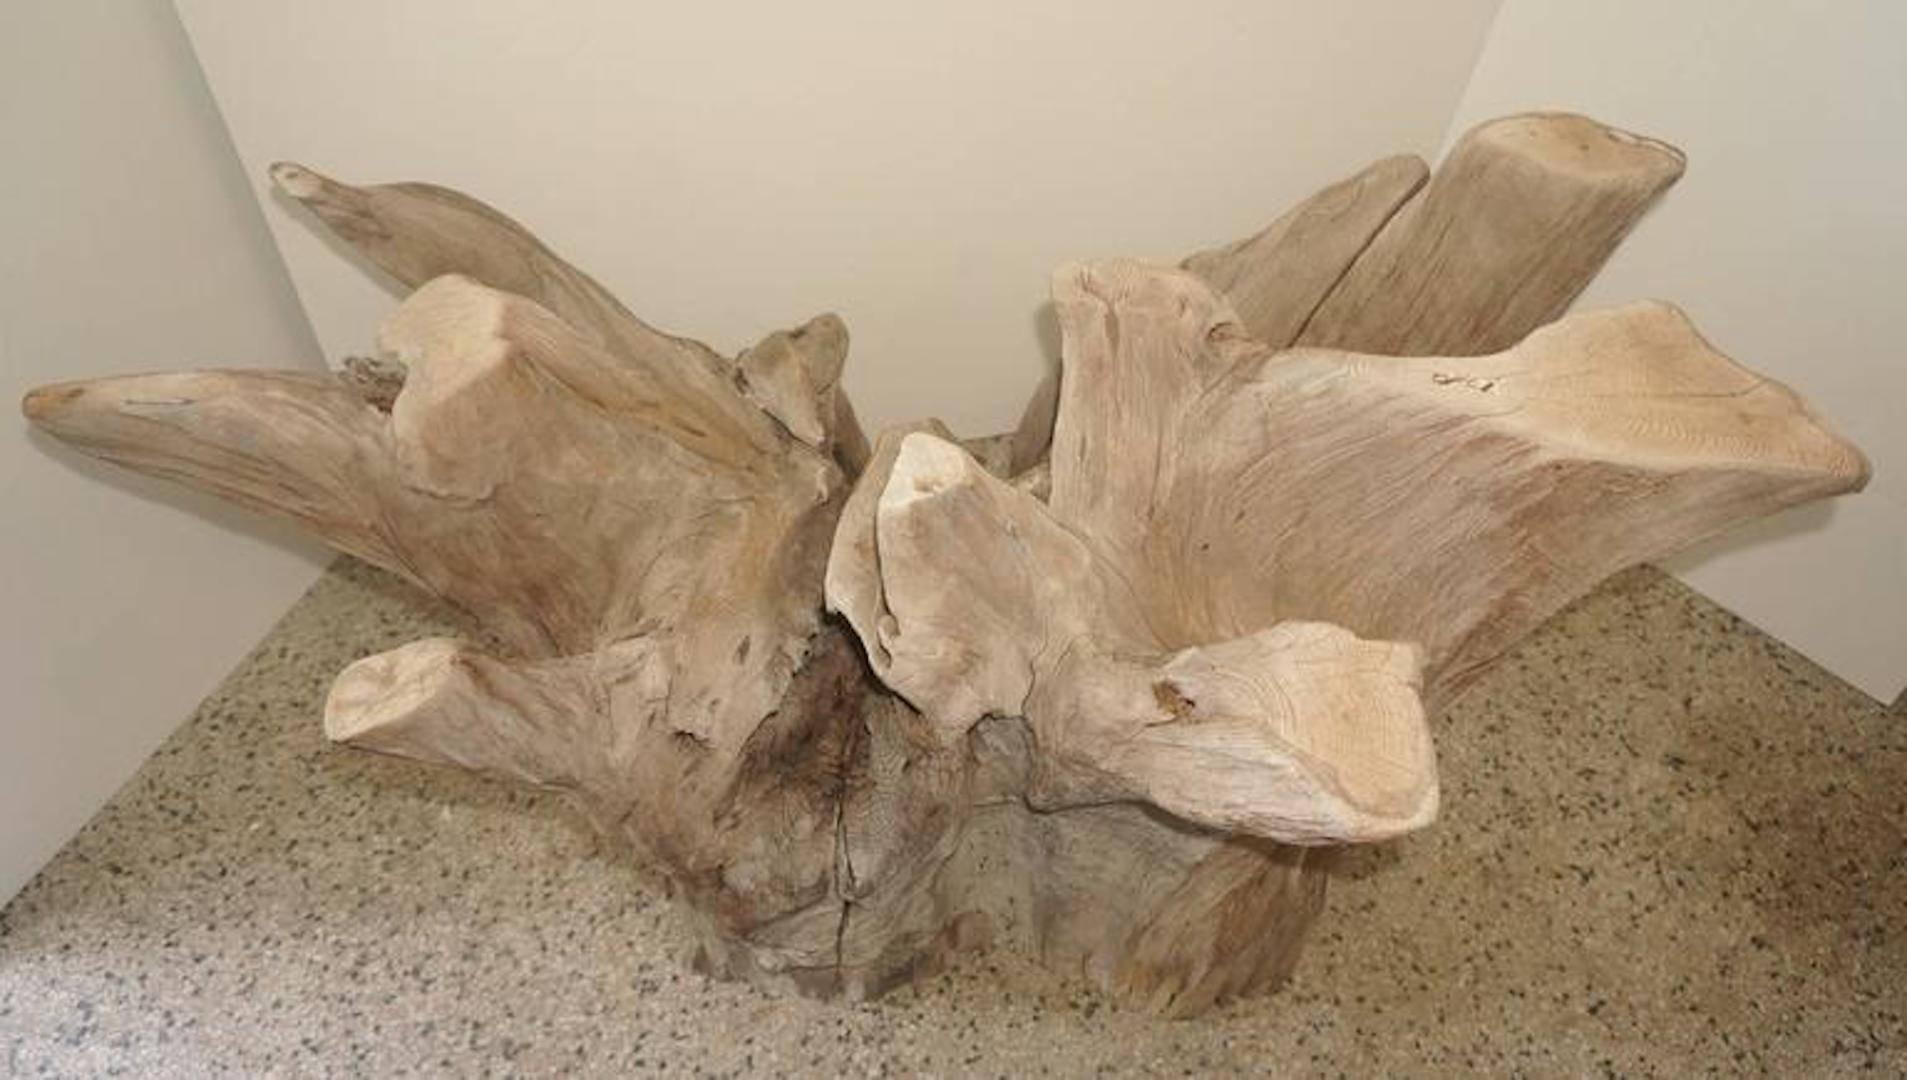 This table base is from a (naturally fallen) Florida cypress tree and could be used with a rectangular piece of glass for a dining table, centre table or perhaps a console table. The piece retains its natural washed-coloration which gives it a very